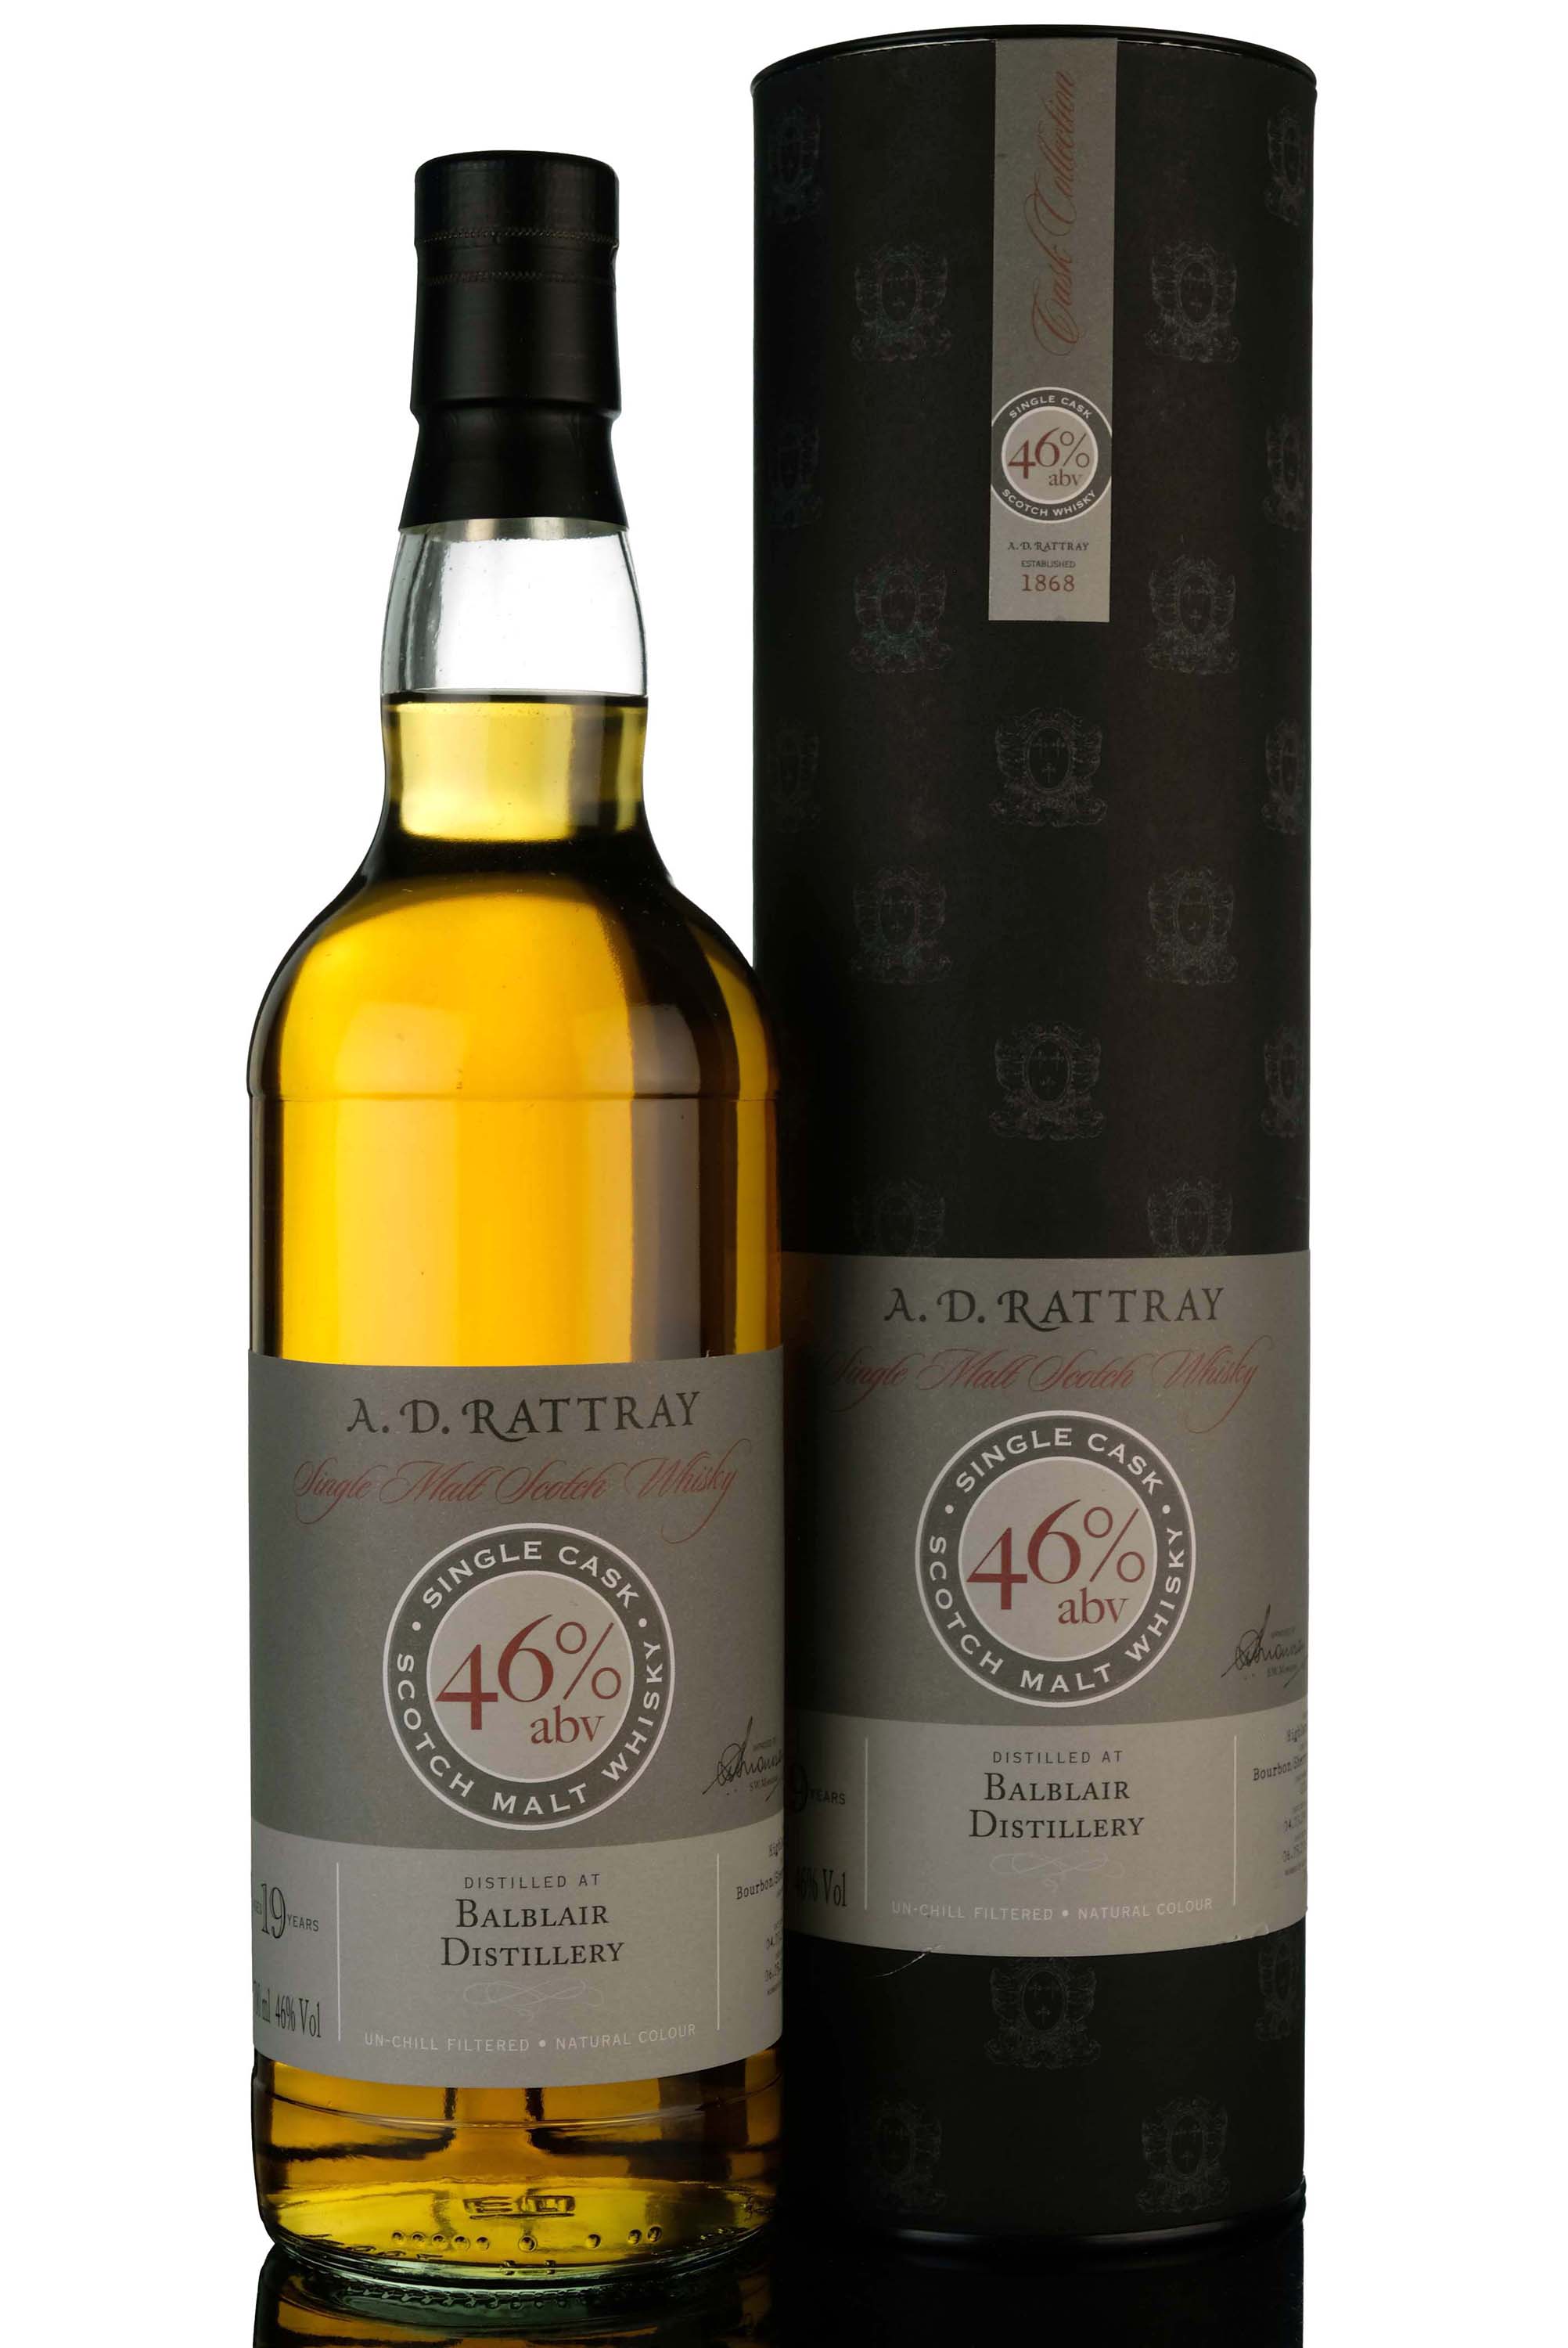 Balblair 1991-2010 - 19 Year Old - A.D. Rattray - Cask Collection - Single Cask 1016